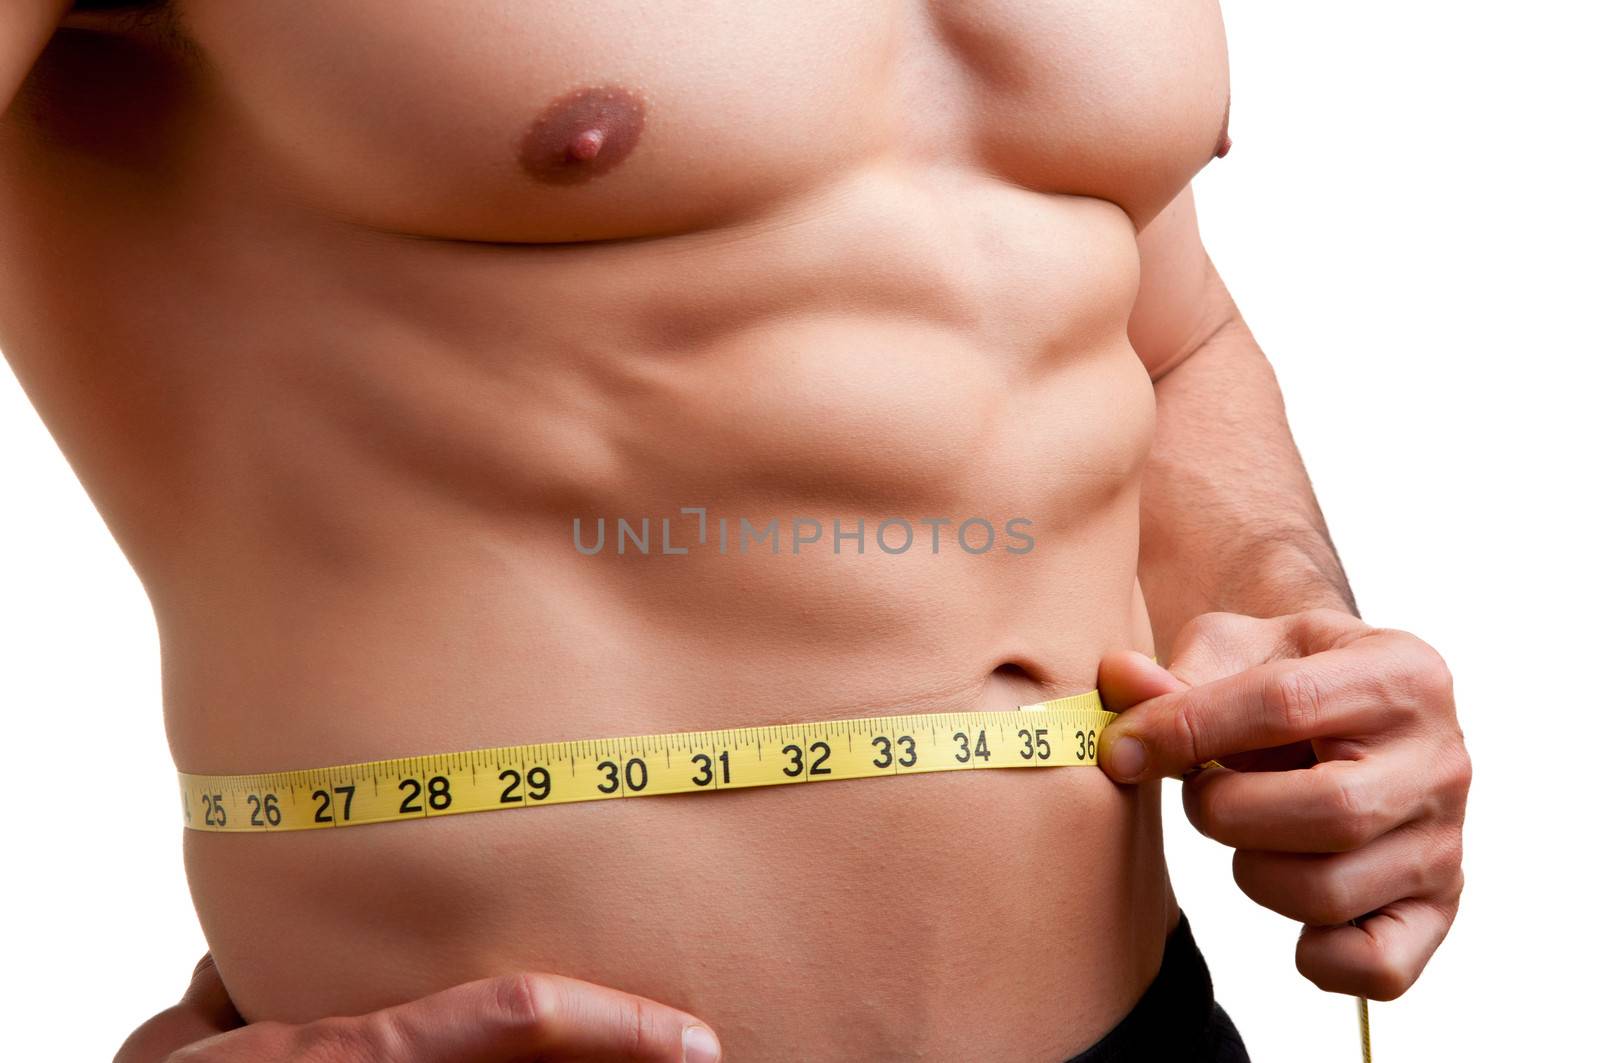 Fit man measuring his waist after a workout in the gym, isolated in a white background